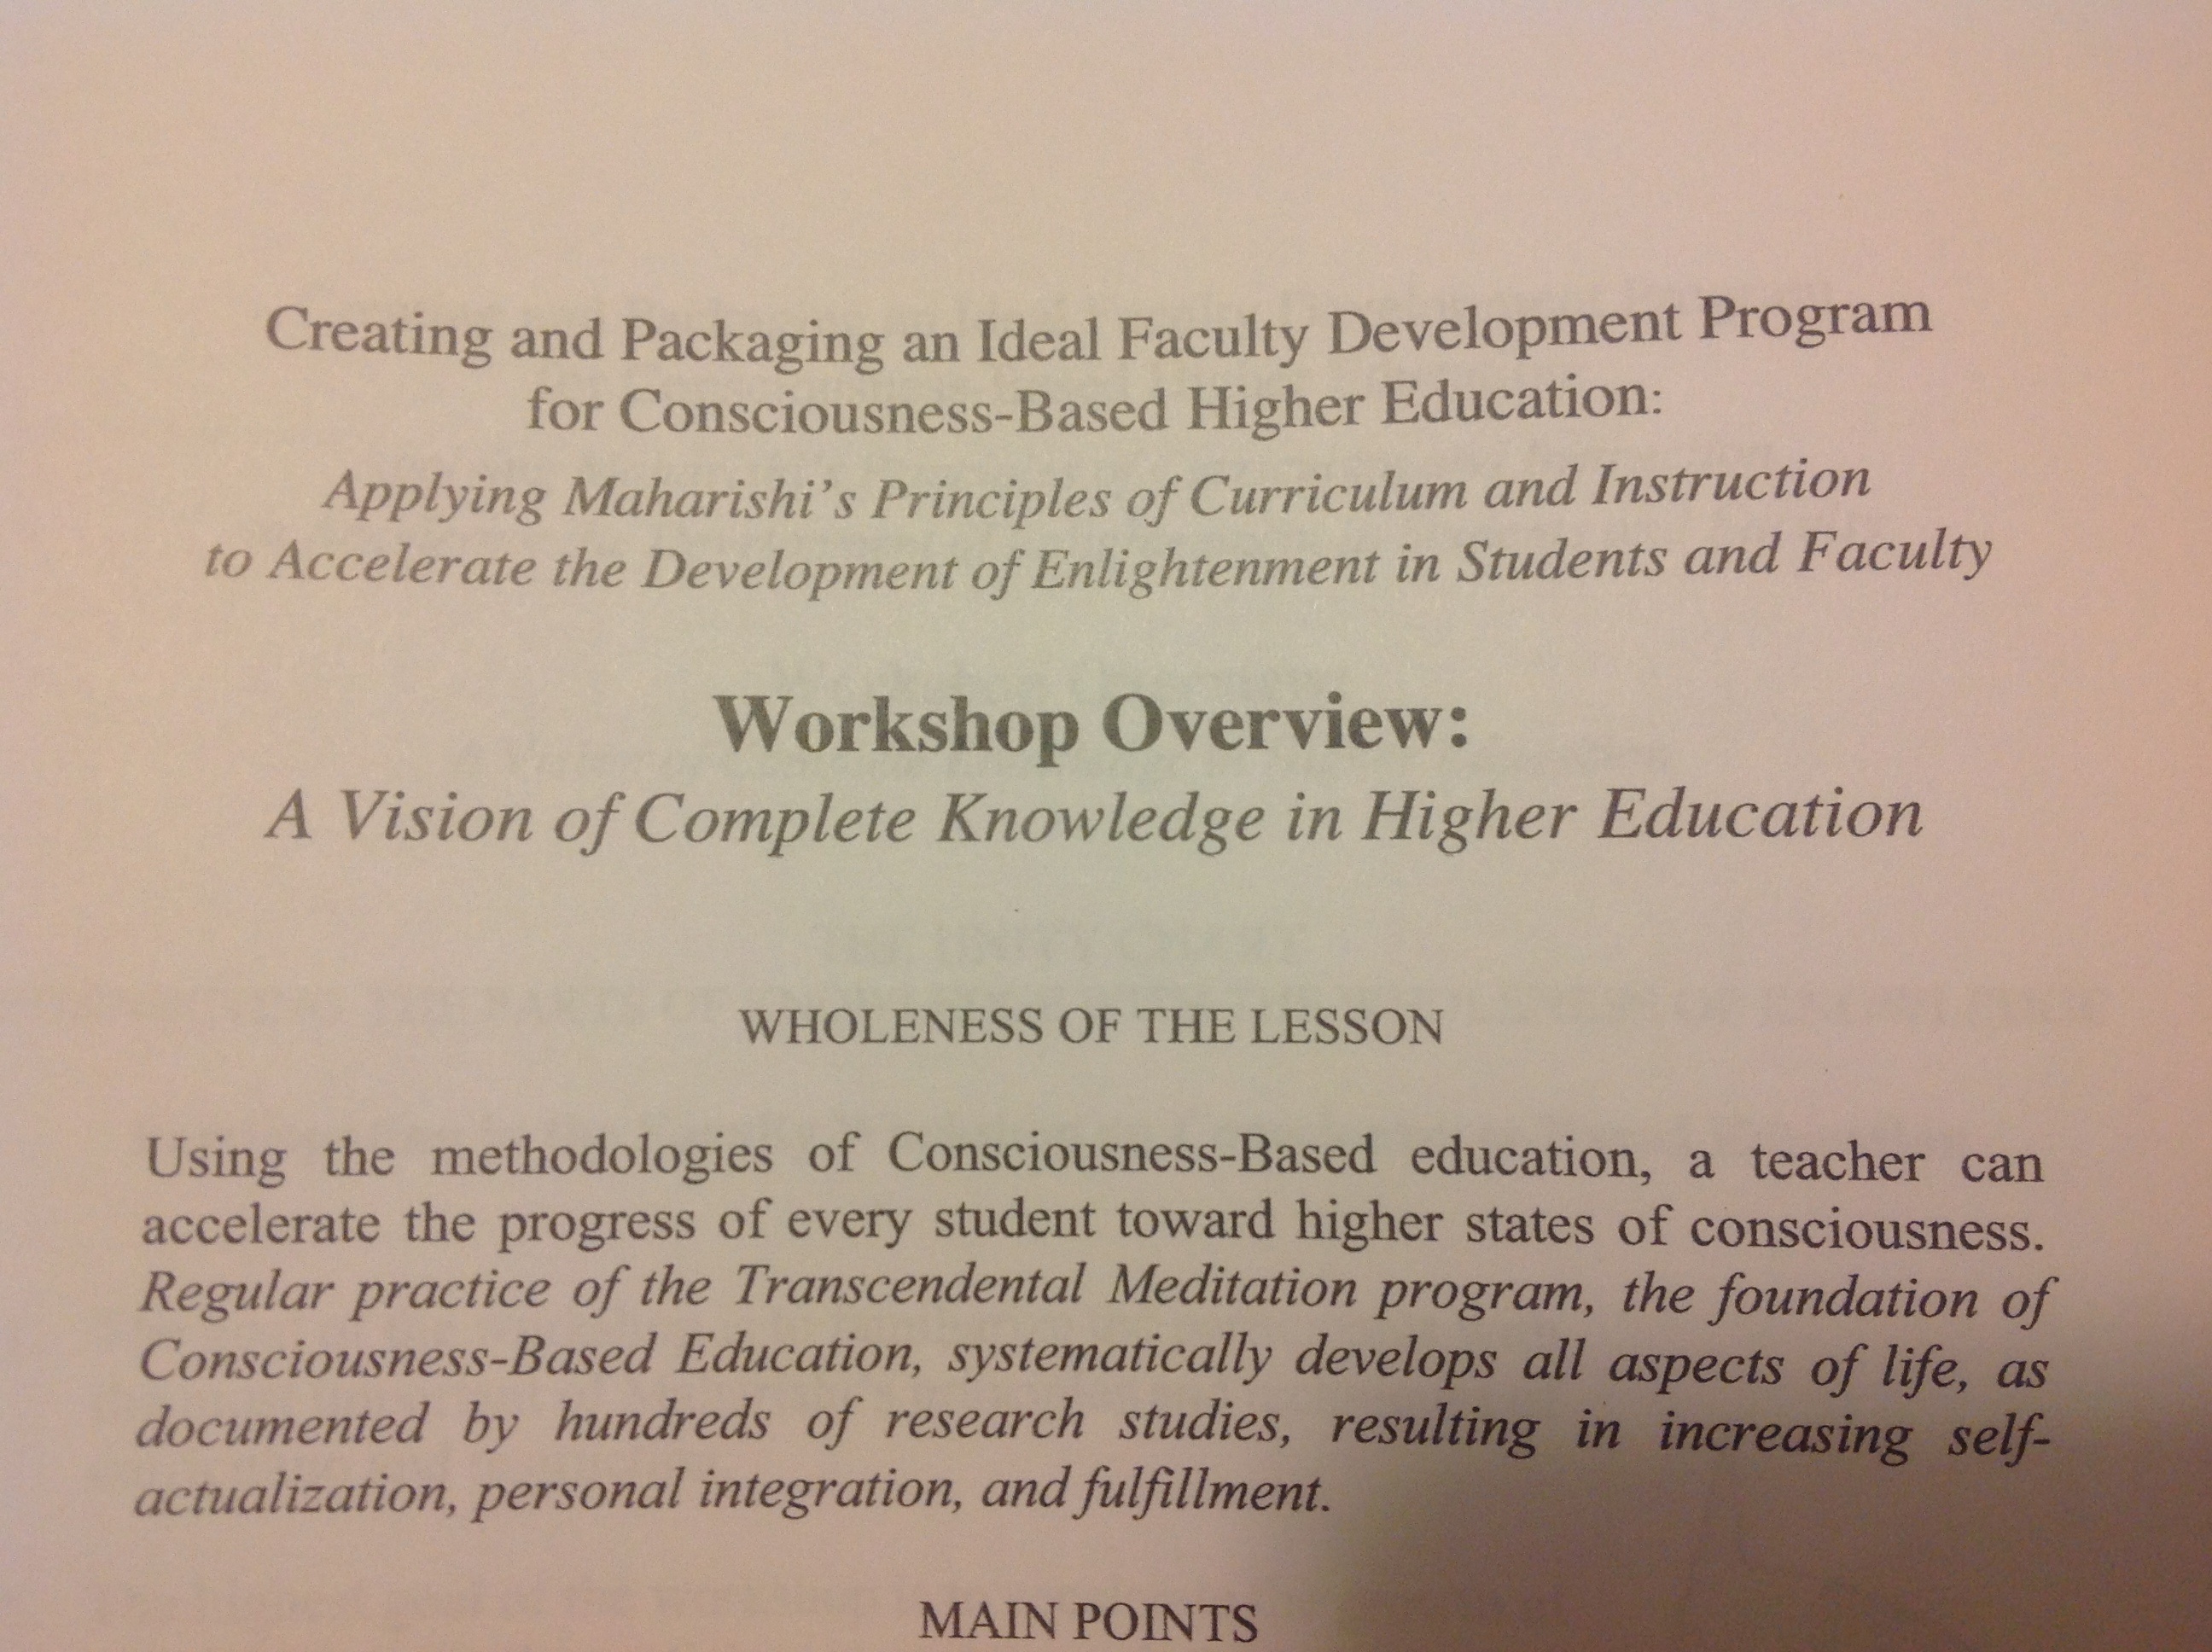 Creating and Packaging an Ideal Faculty Development Program for Consciousness-Based Higher Learning.